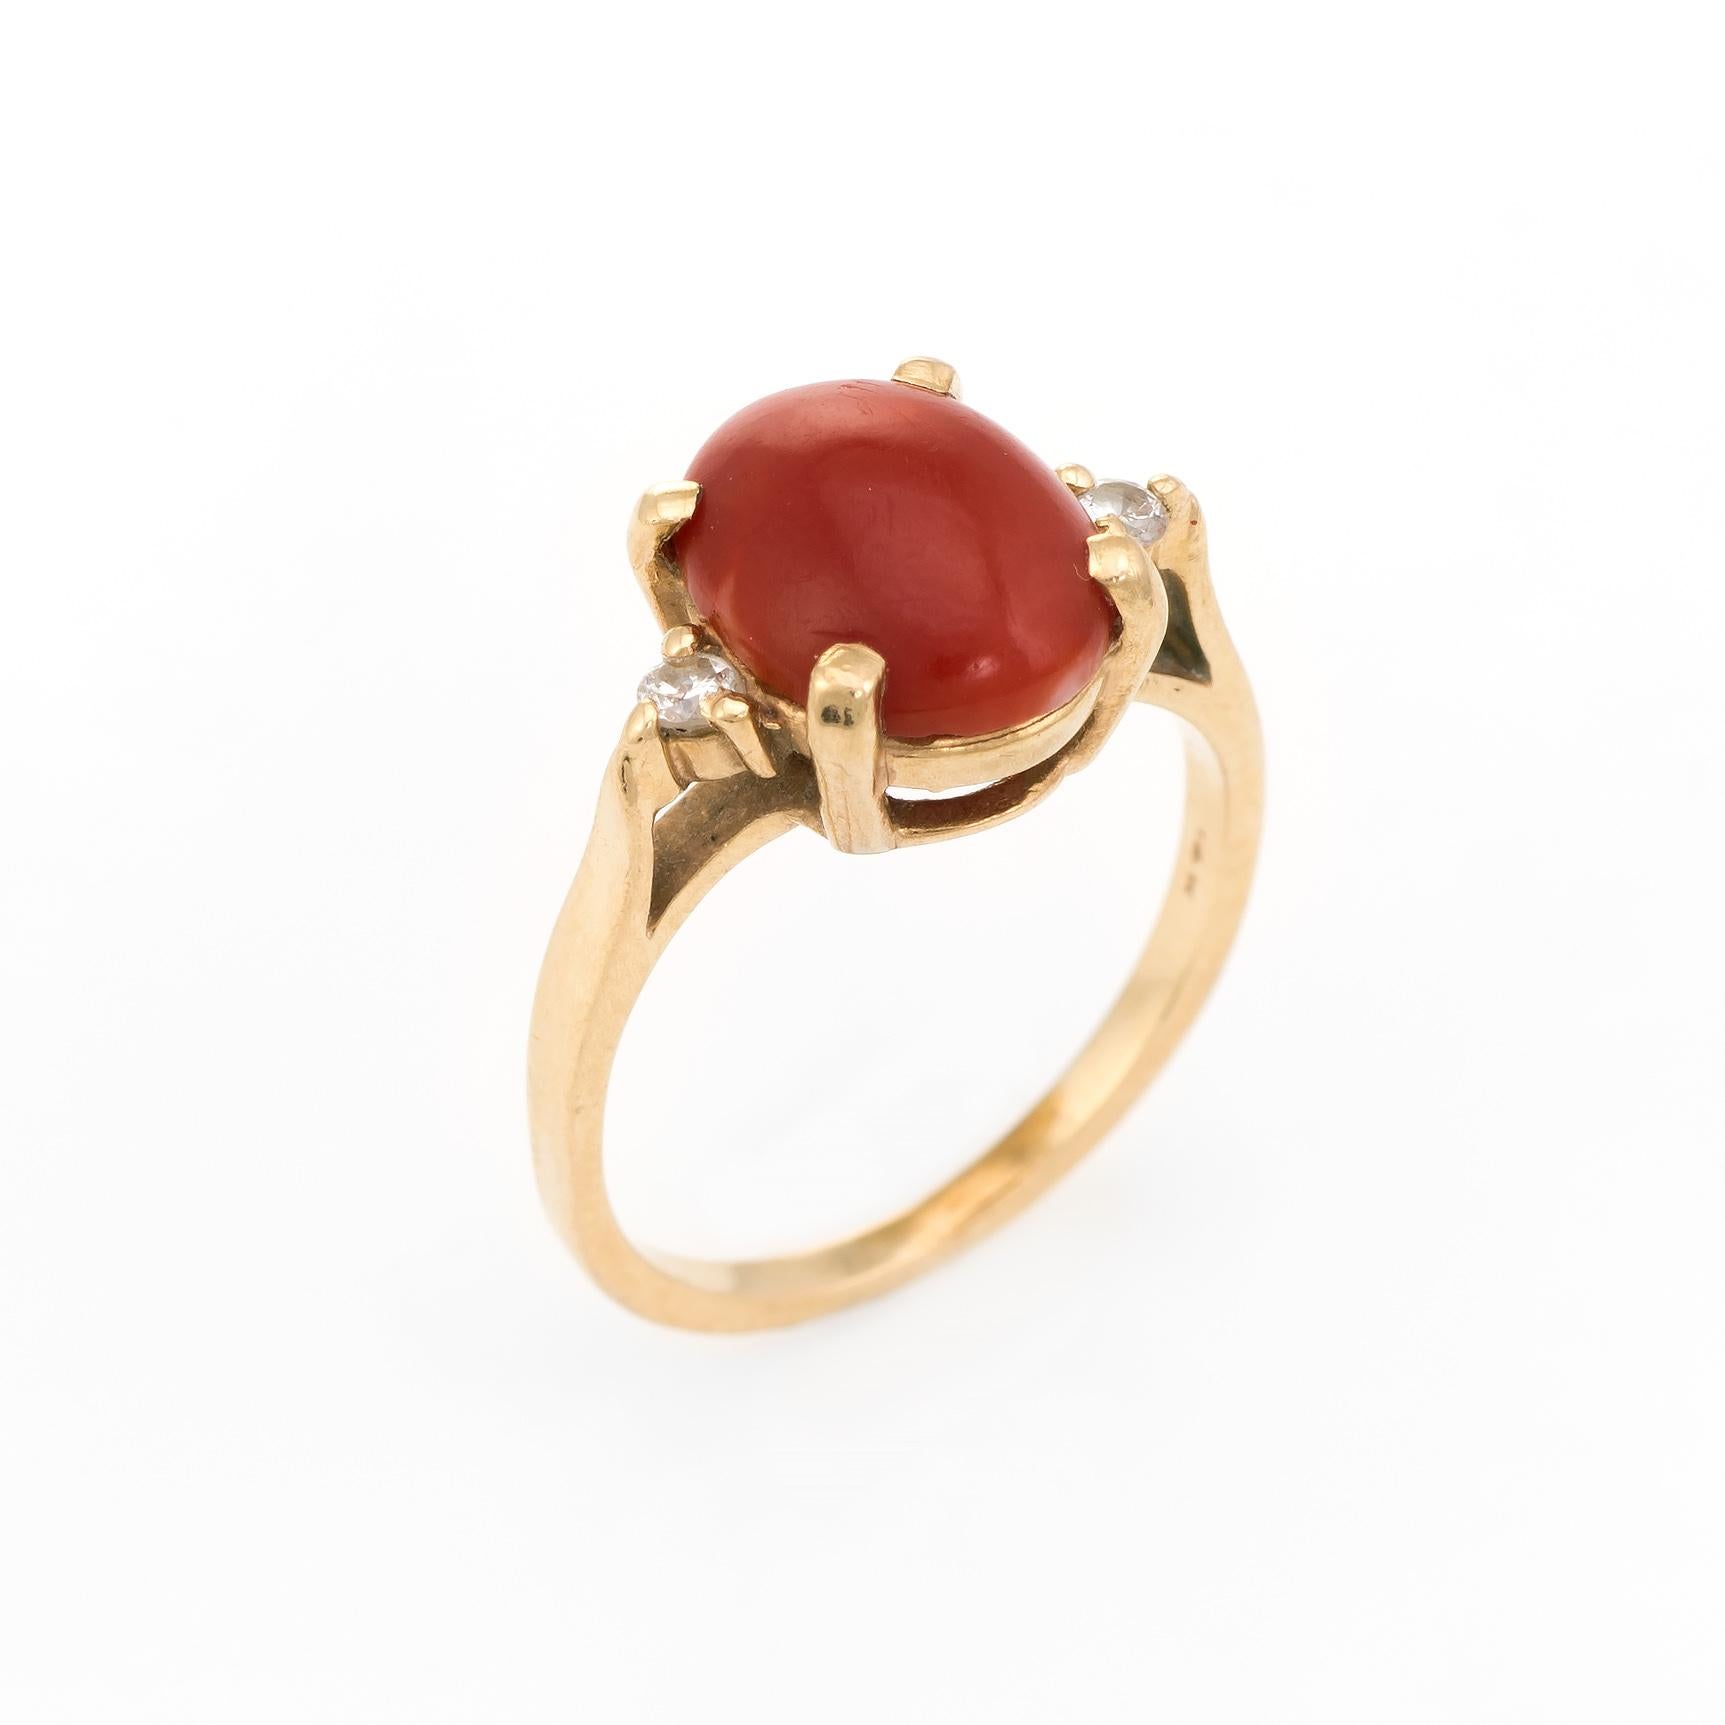 Finely detailed vintage ox blood coral & diamond cocktail ring, crafted in 14 karat yellow gold. 

Centrally mounted ox blood coral measures 10mm x 8mm (estimated at 3.50 carats), accented with two estimated 0.03 carat round brilliant cut diamonds.